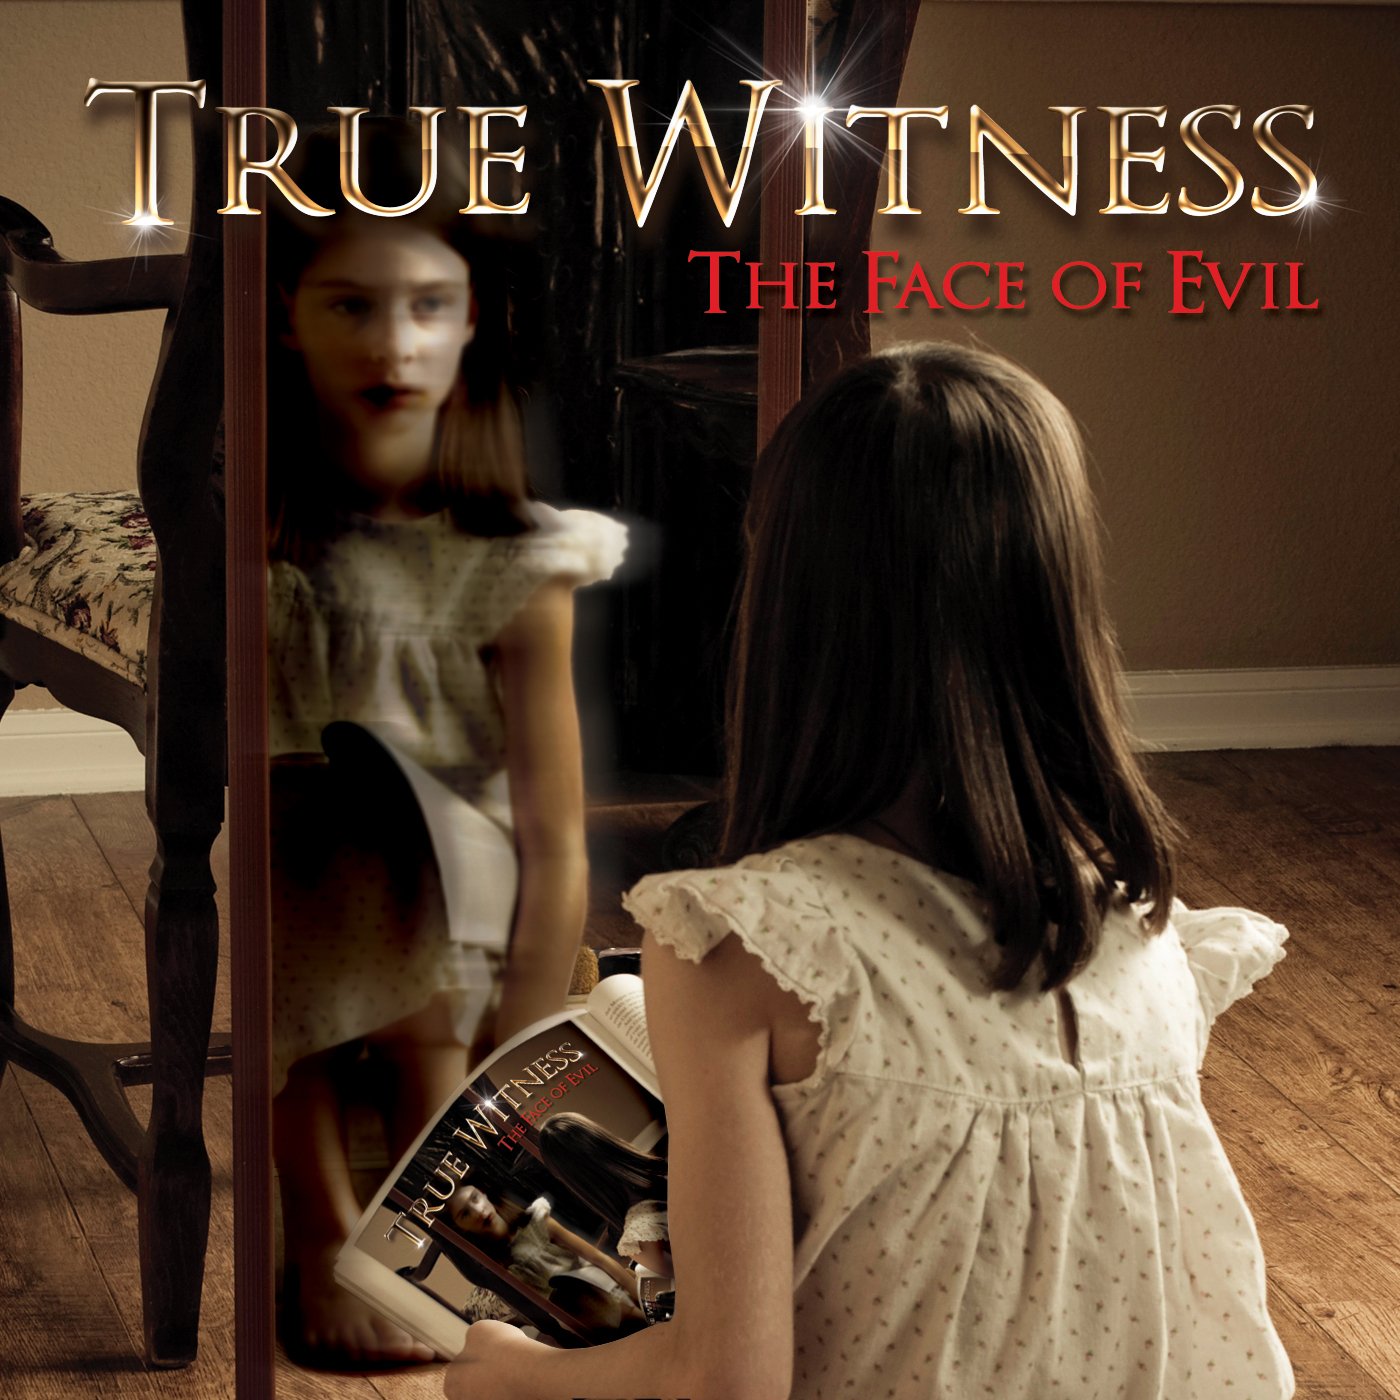 The Face of Evil by True Witness USB Wristband